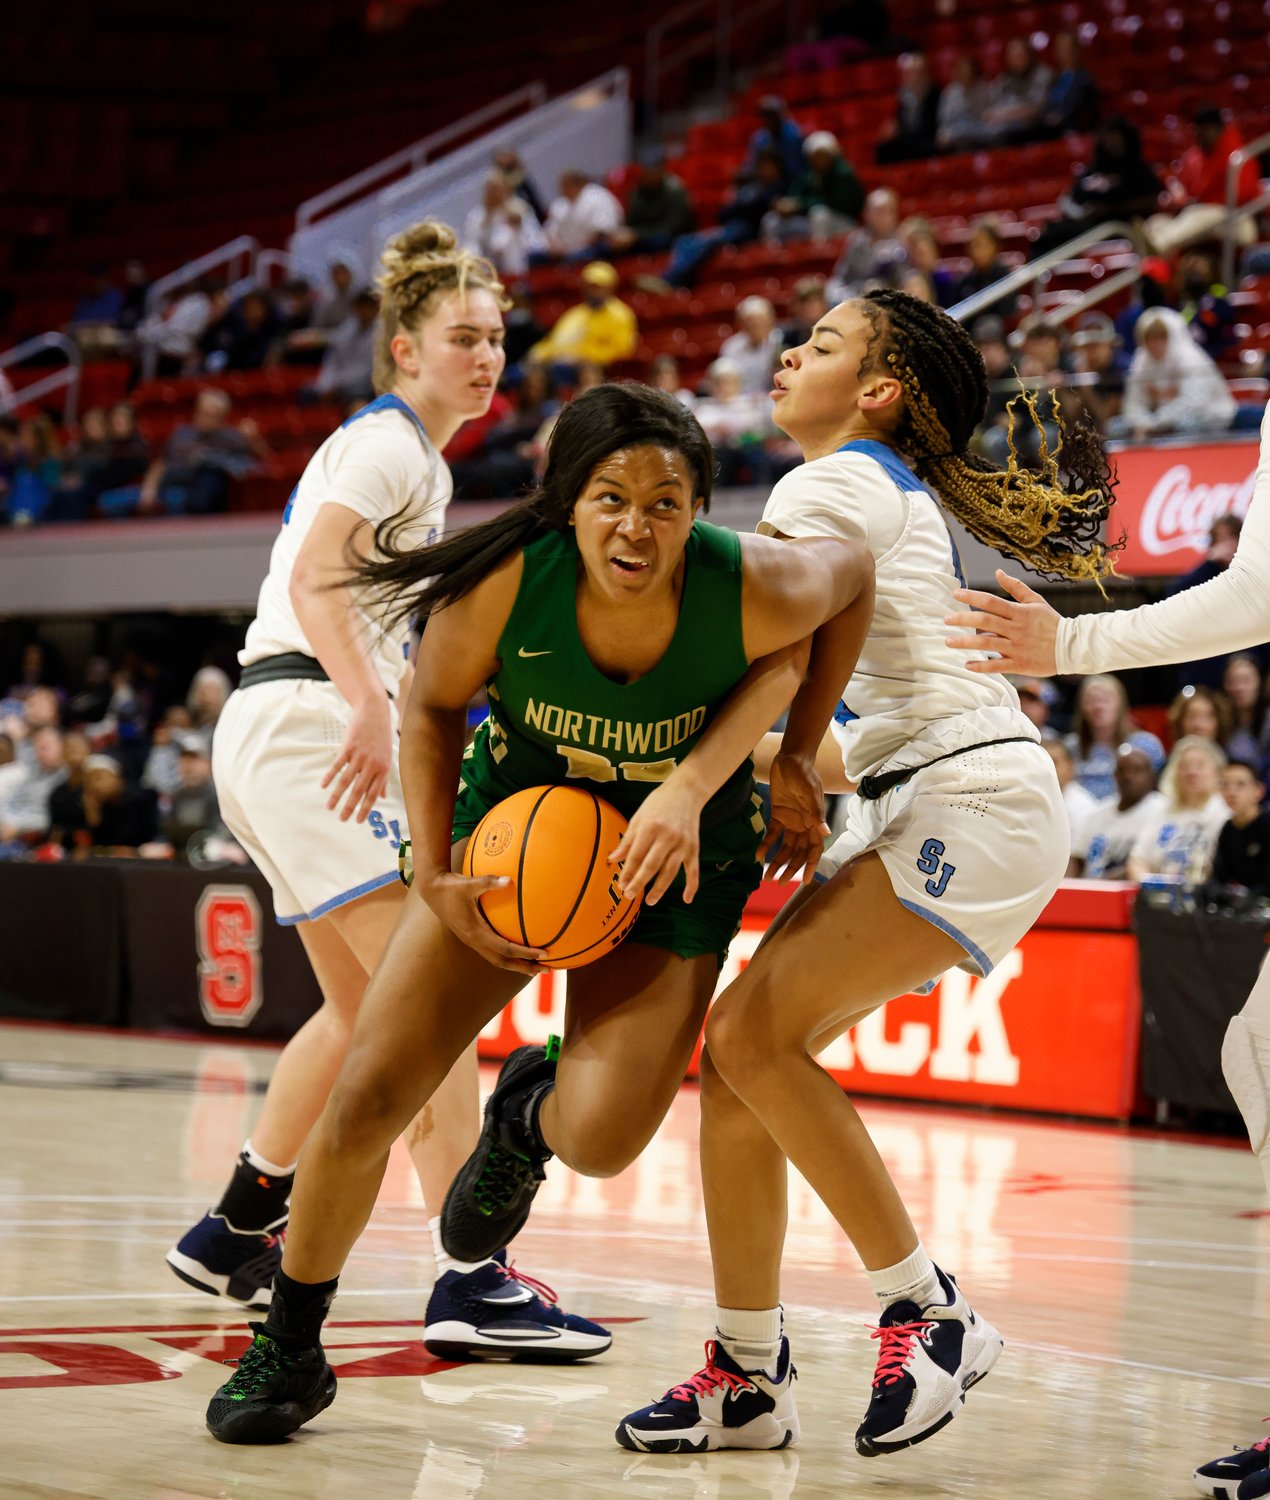 Northwood senior Olivia Porter (in green) splits two defenders on her way to the basket the Chargers' 72-40 win over the Enka Jets in the 3A women's basketball state championship game in Raleigh on Saturday. Porter (18 points, 5 rebounds) was named the Kay Yow Most Valuable Player after her performance in the victory.